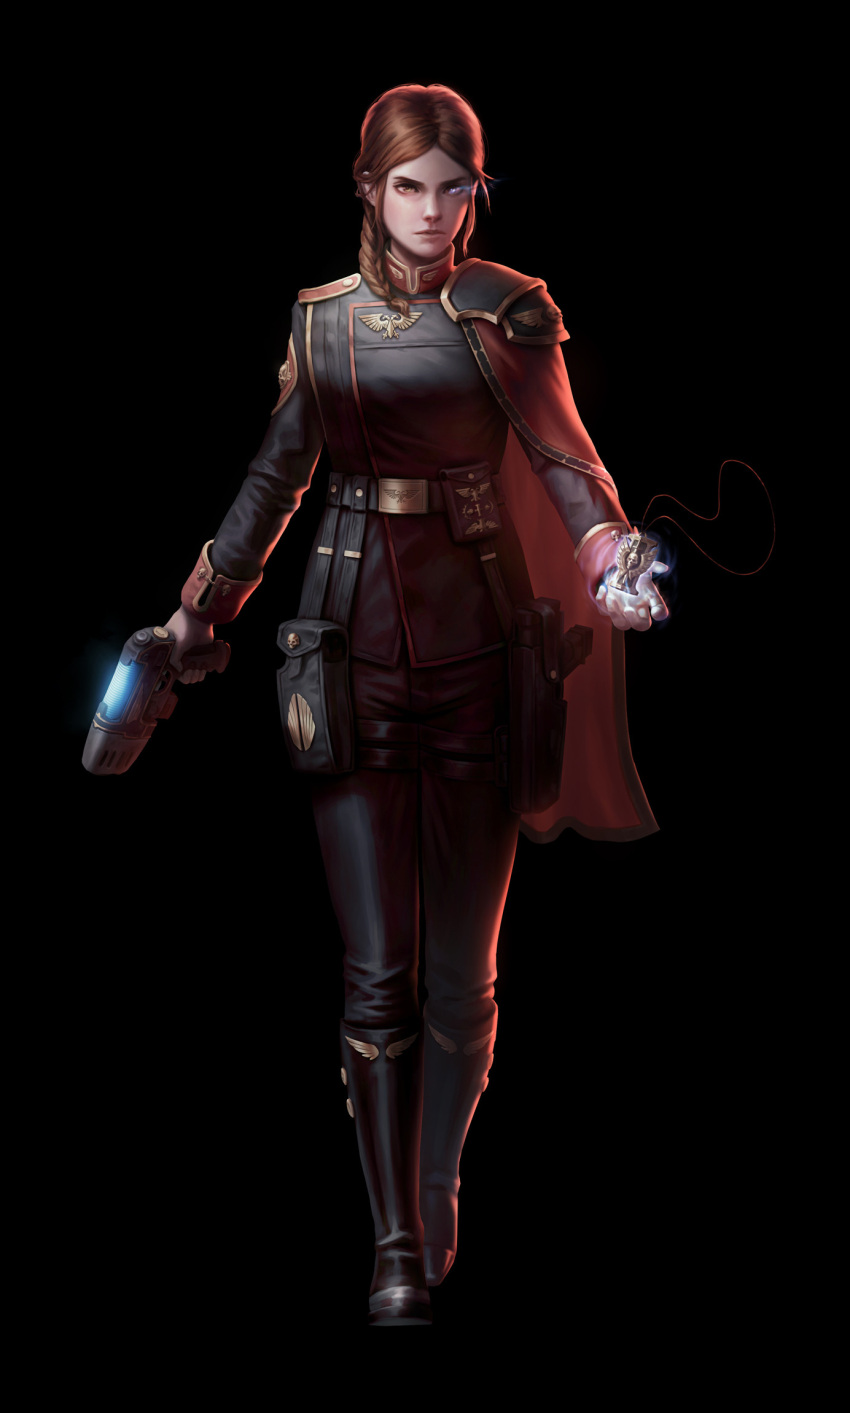 1girl bangs black_background black_footwear black_jacket black_pants boots braid braided_ponytail brown_eyes brown_hair cape closed_mouth glowing glowing_eye gun highres holding holding_gun holding_weapon imperium_of_man inquisition_(warhammer) jacket lips long_hair long_sleeves military military_uniform pants plasma_pistol psyker red_cape simple_background solo standing twotimesthedime uniform warhammer_40k weapon